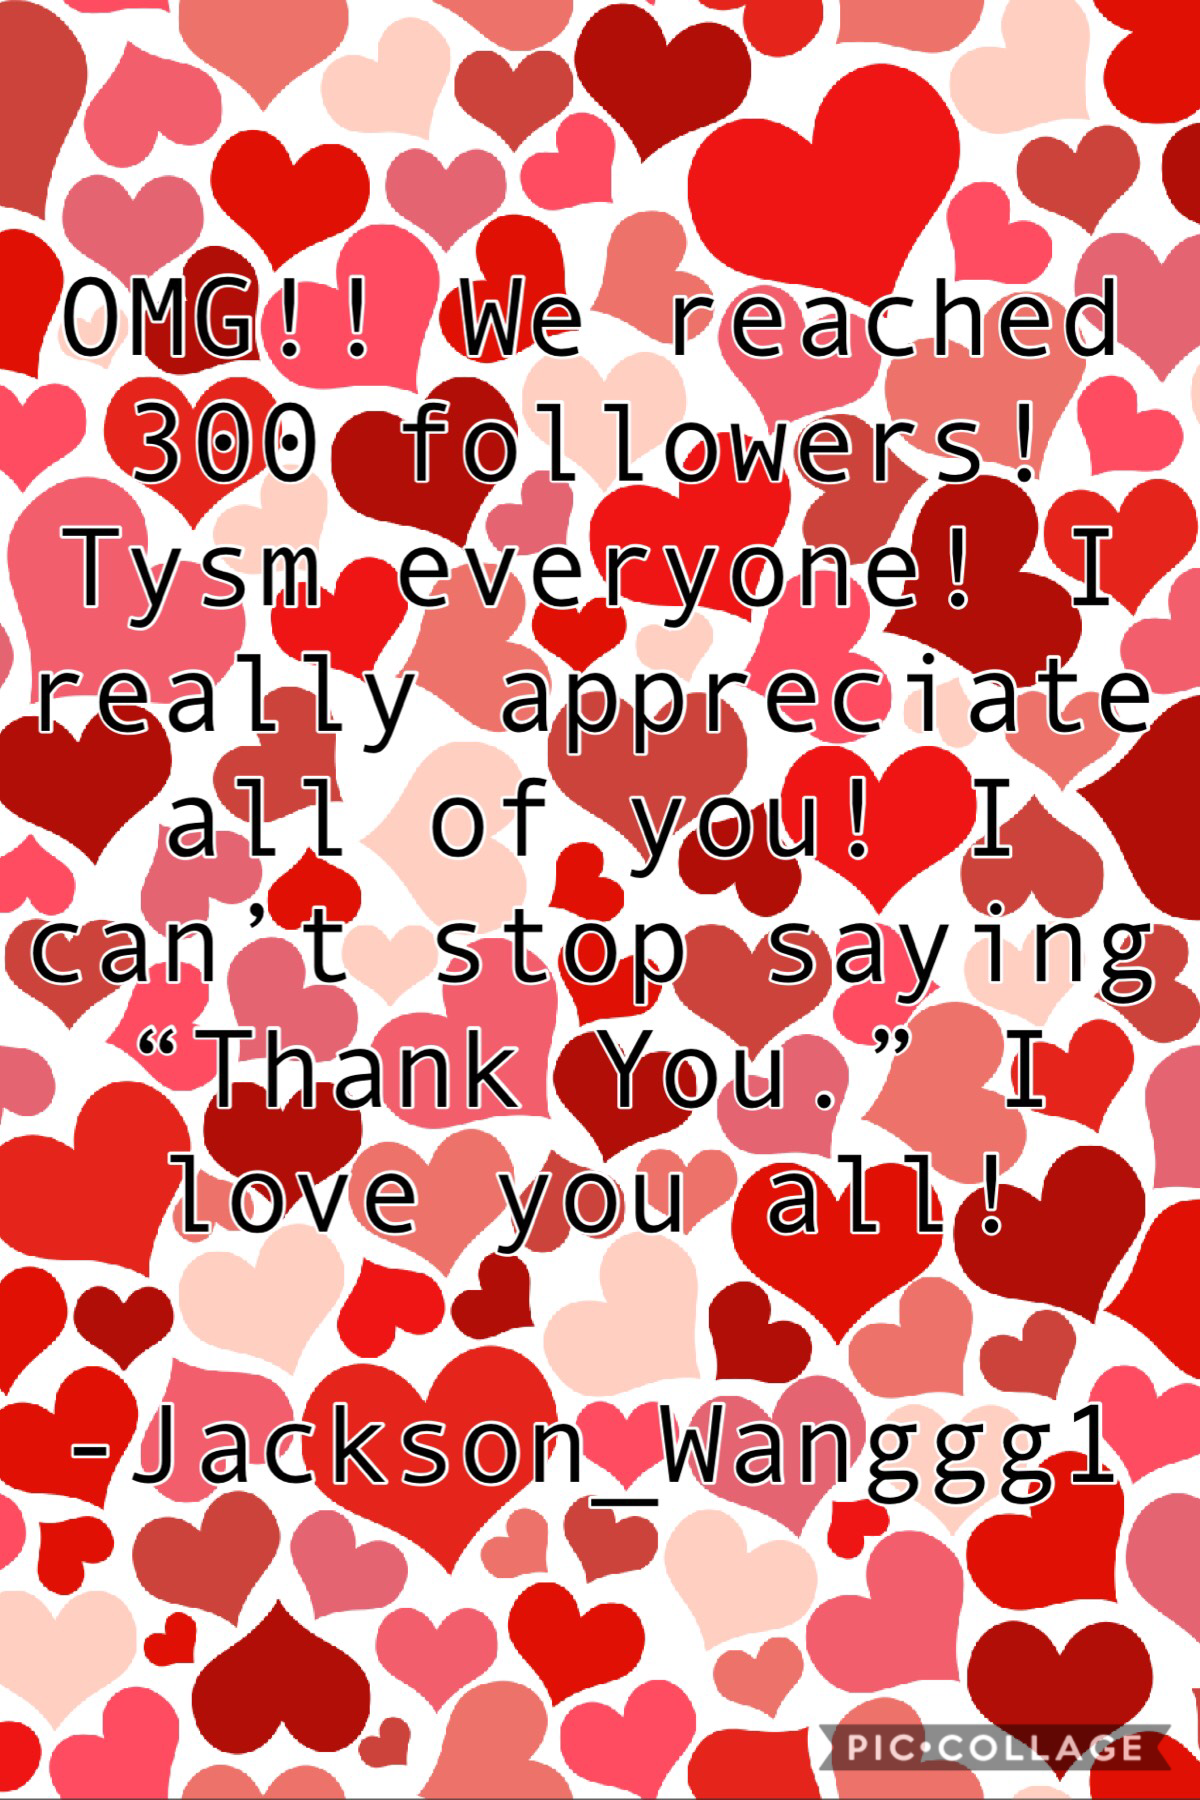 Tysm everyone! It means so much!